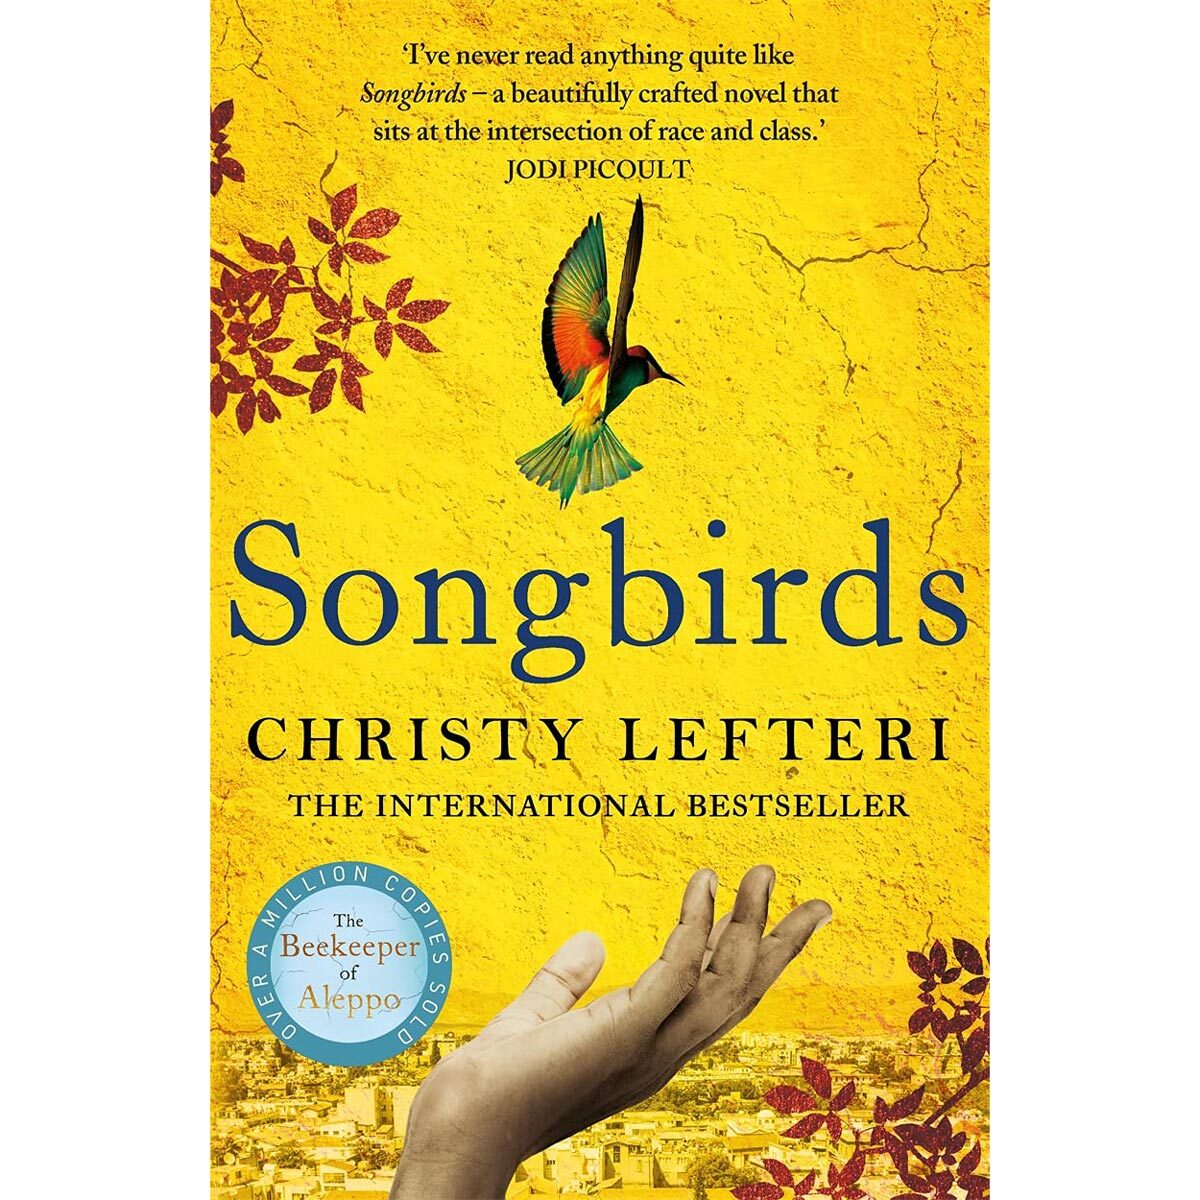 Front cover images of Christy Lefteri Songbirds